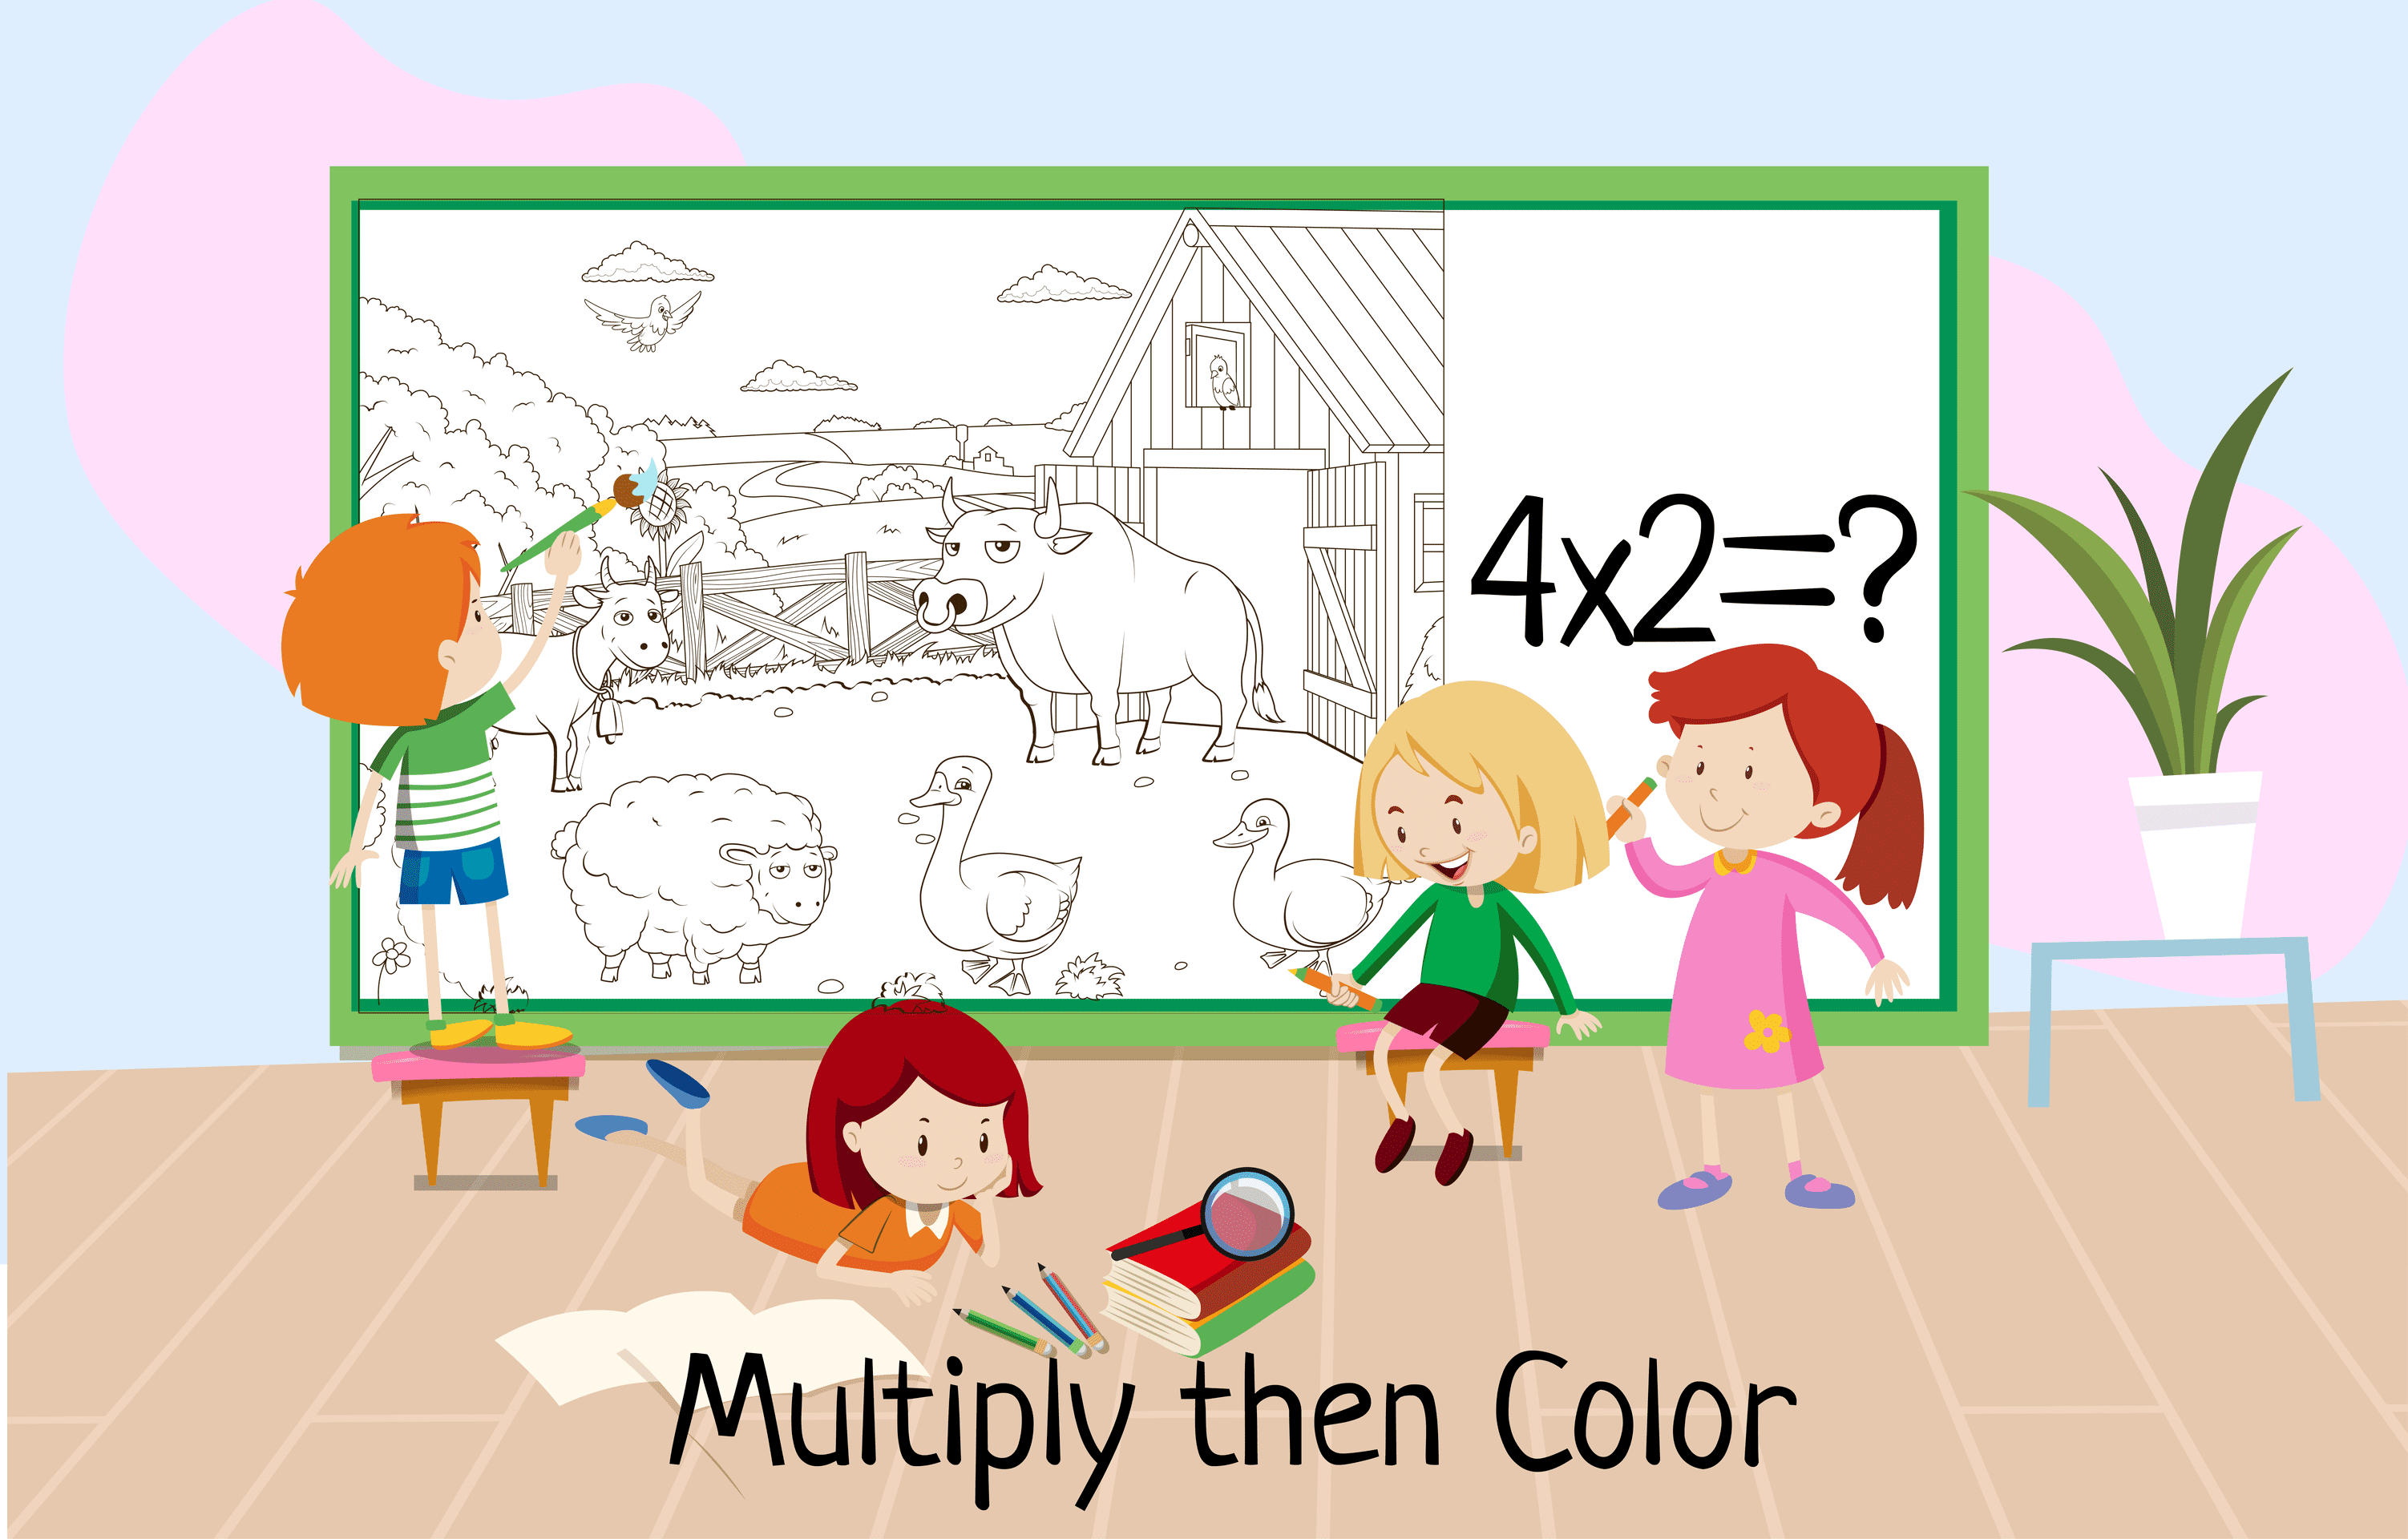 Multiplying for Coloring Farm